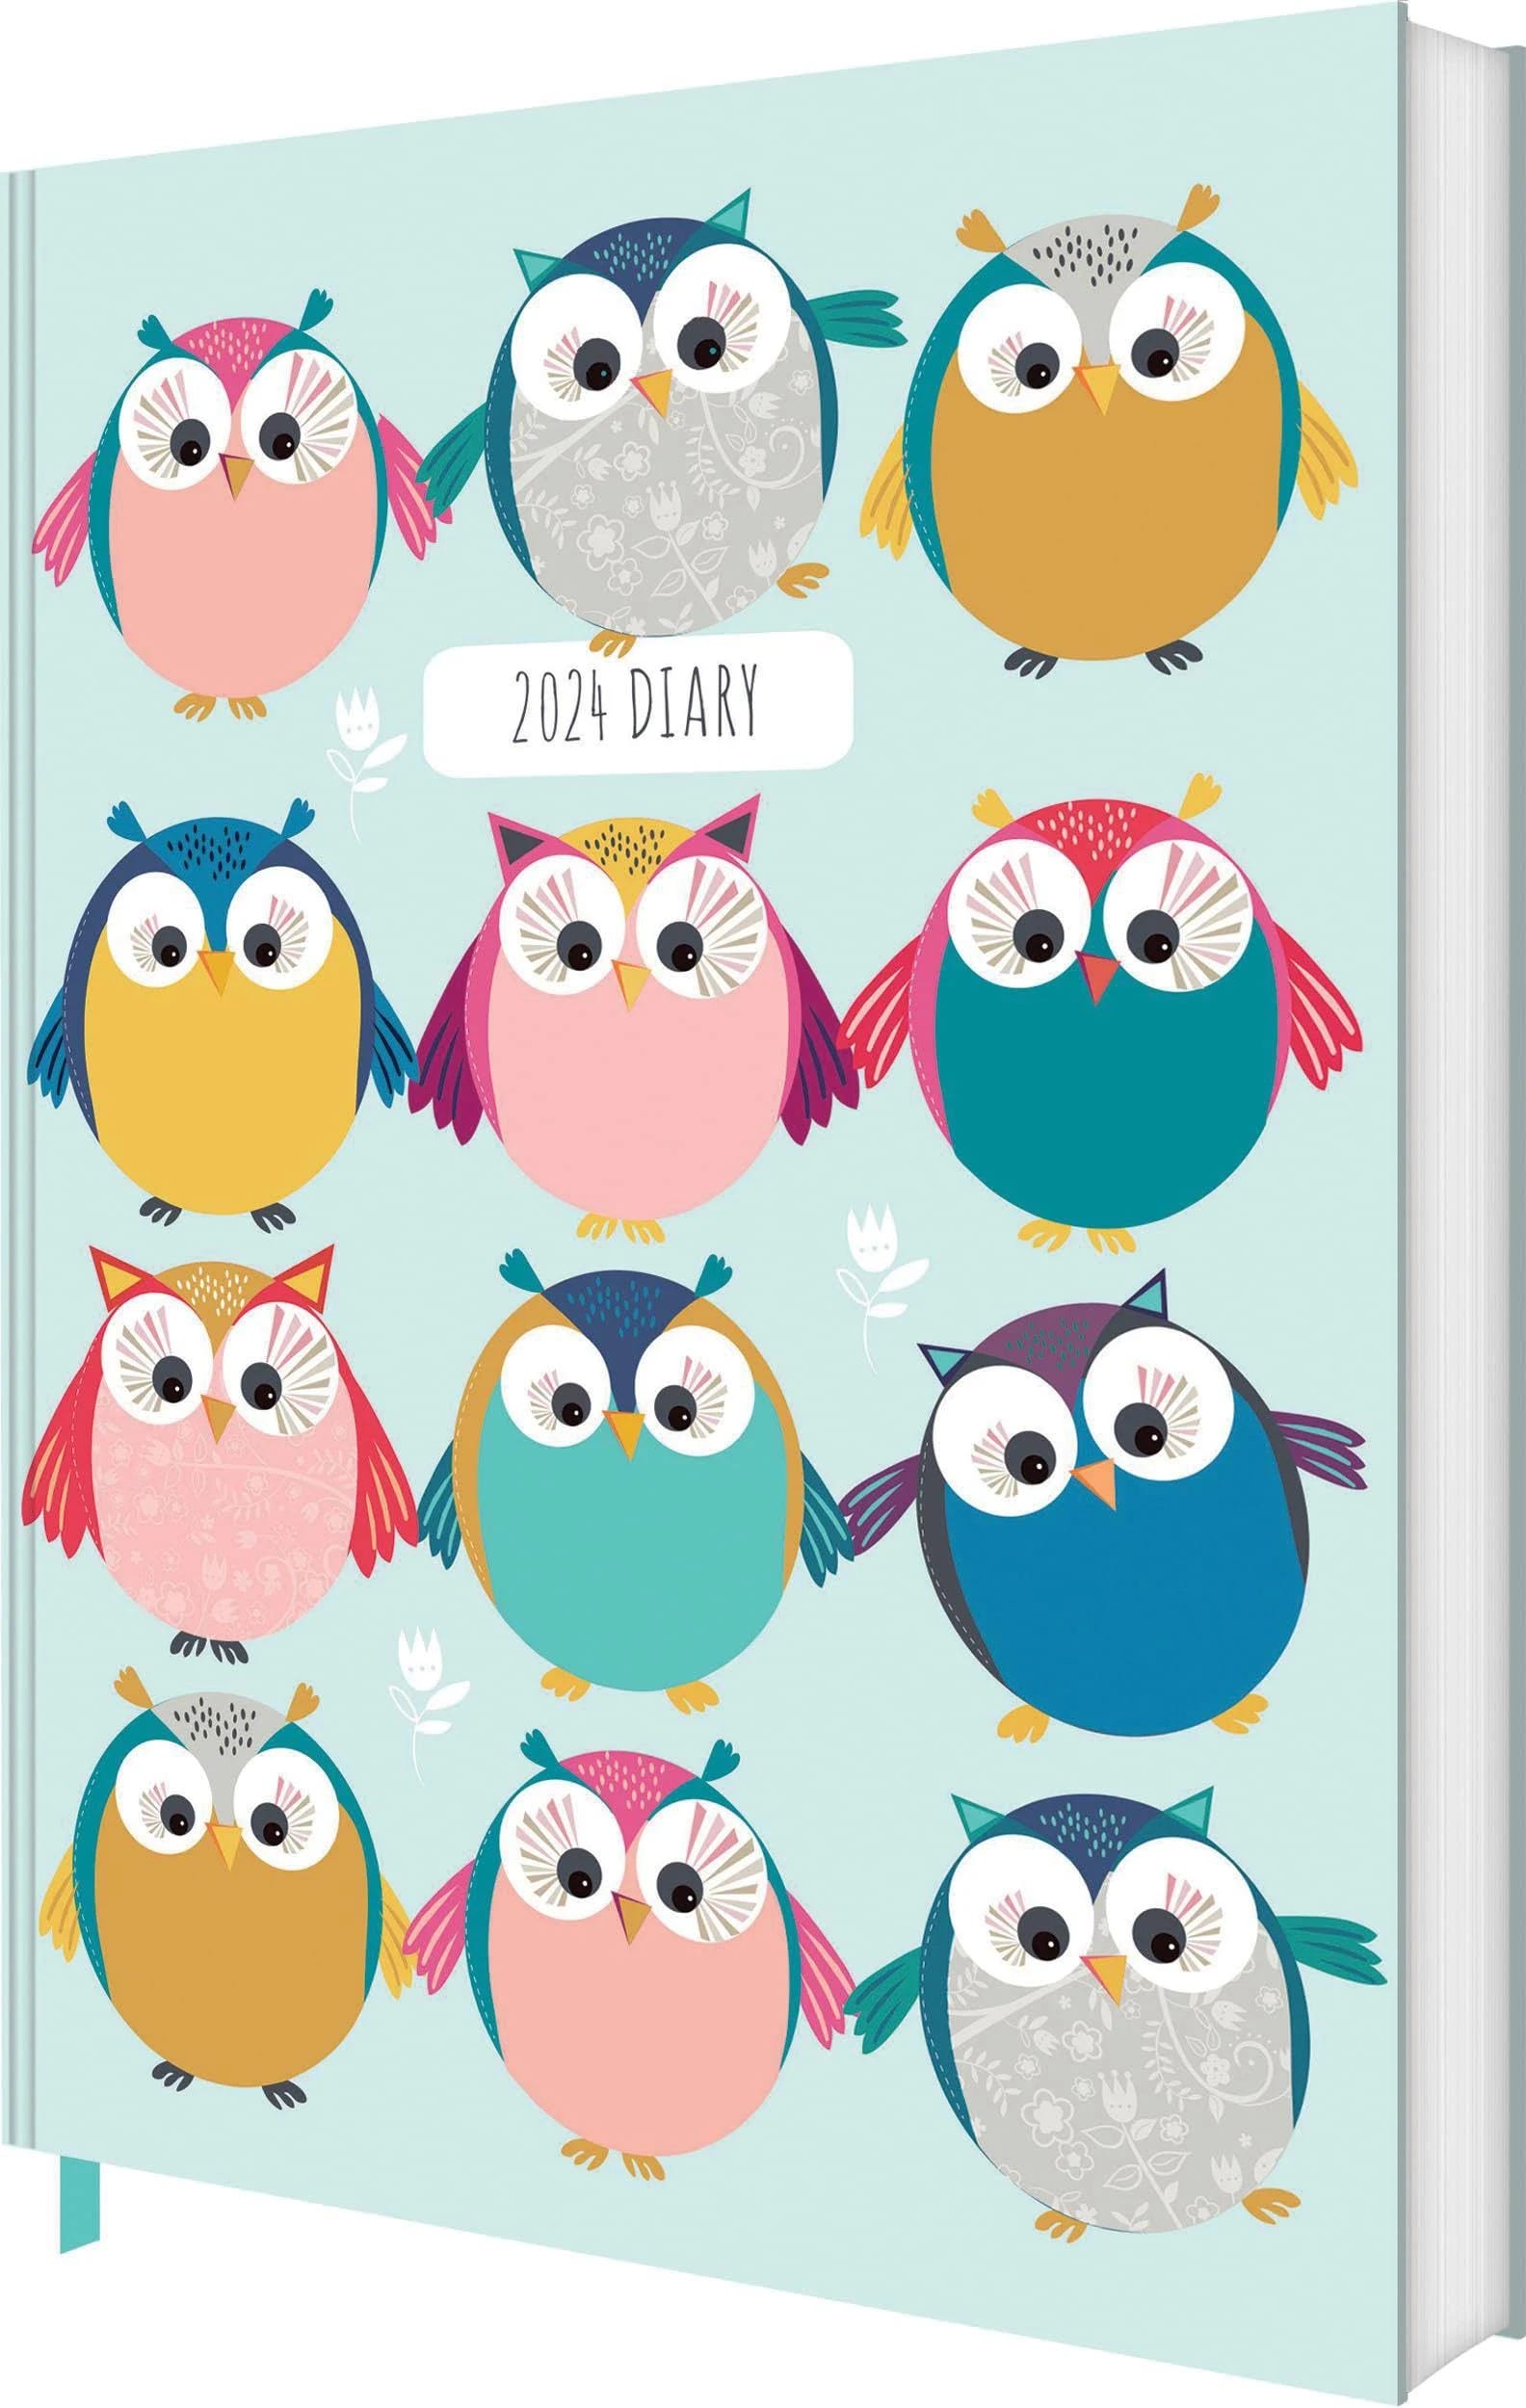 Colorful Owl A5 Diary: Well-Made and Sustainable | Image